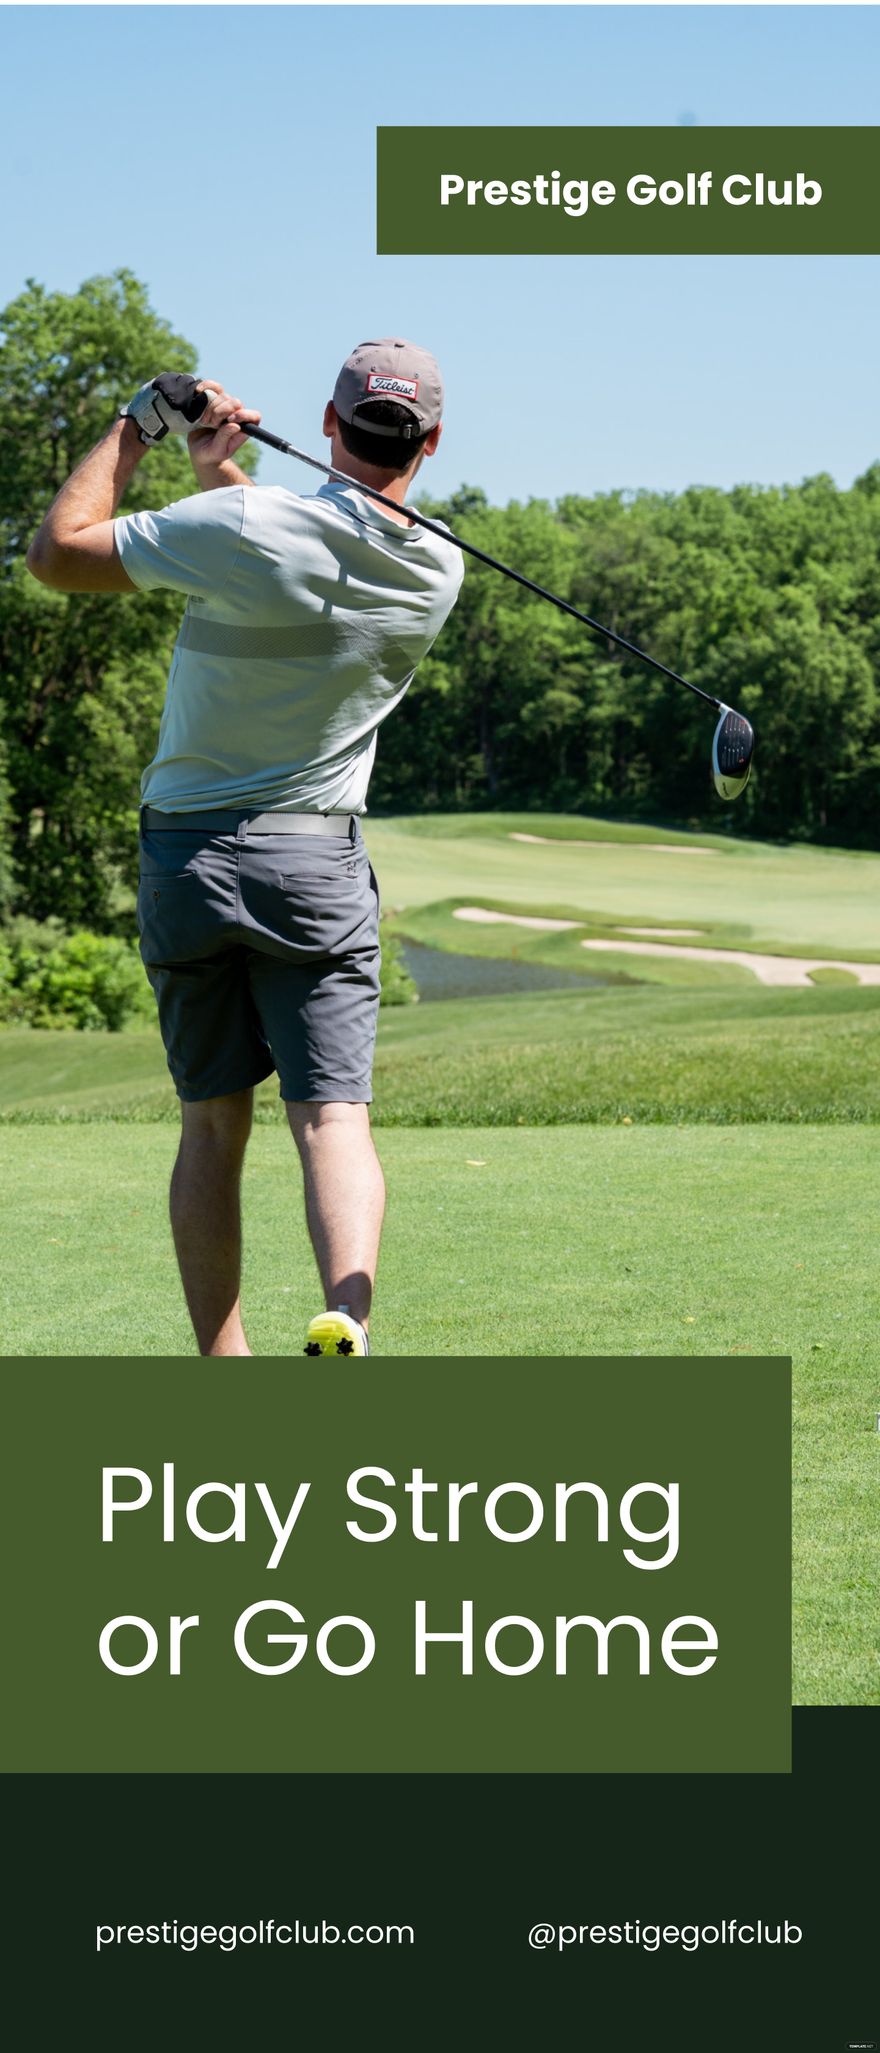 Free Golf Club Rollup Banner Template in Word, Google Docs, Publisher